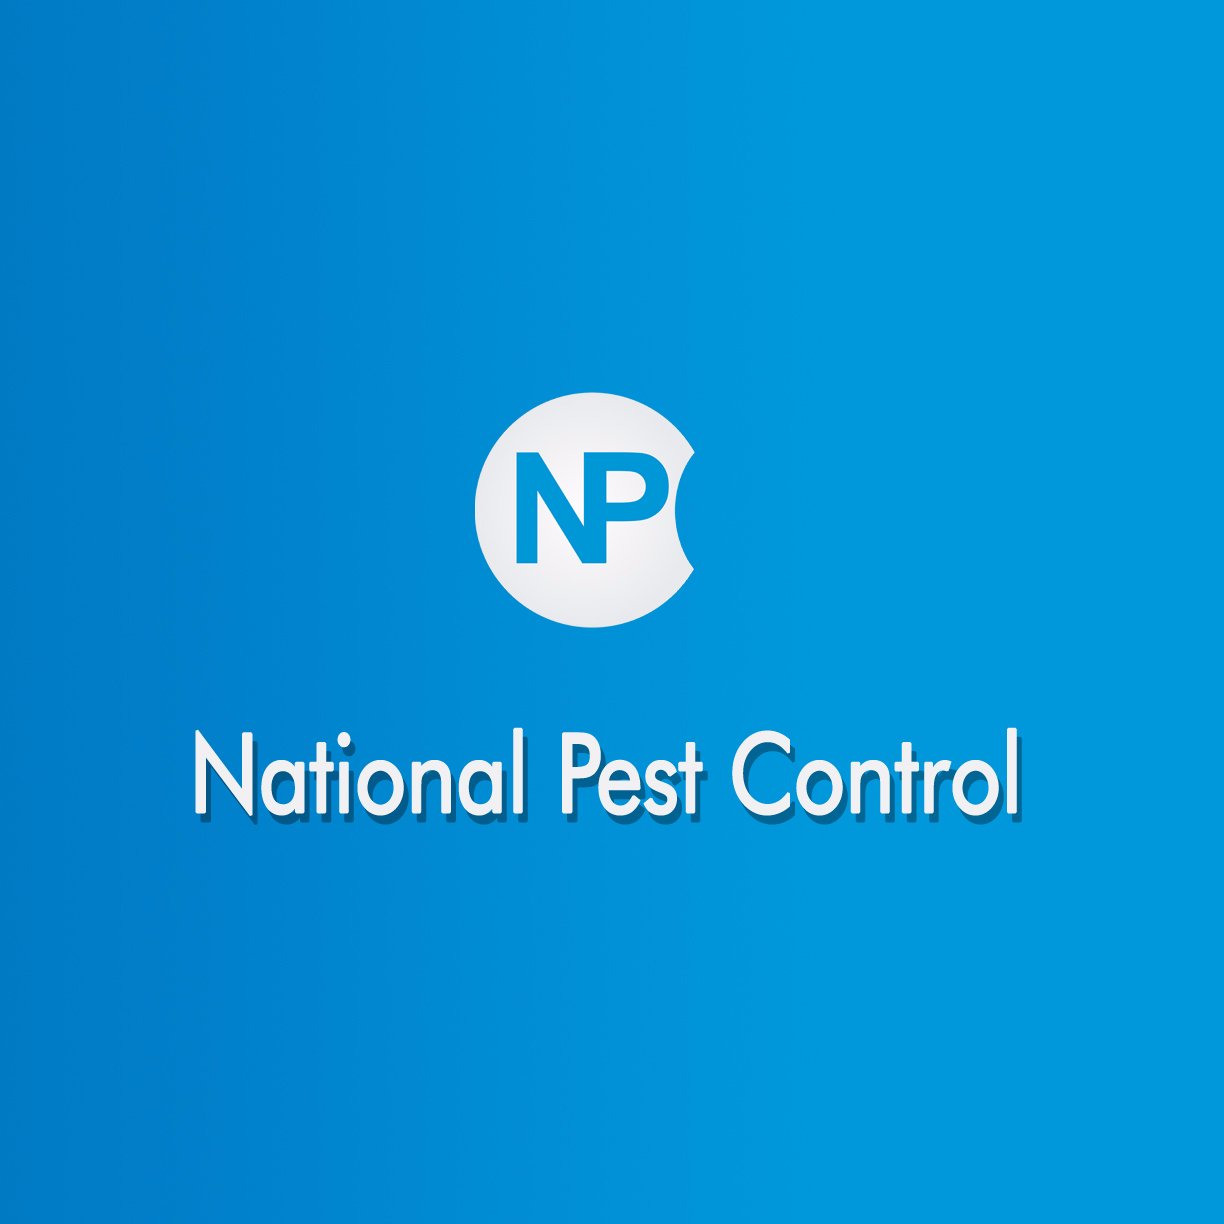 NPC started up in 1993, and we’ve been on an amazing journey ever since. From our beginning as a residential pest control company